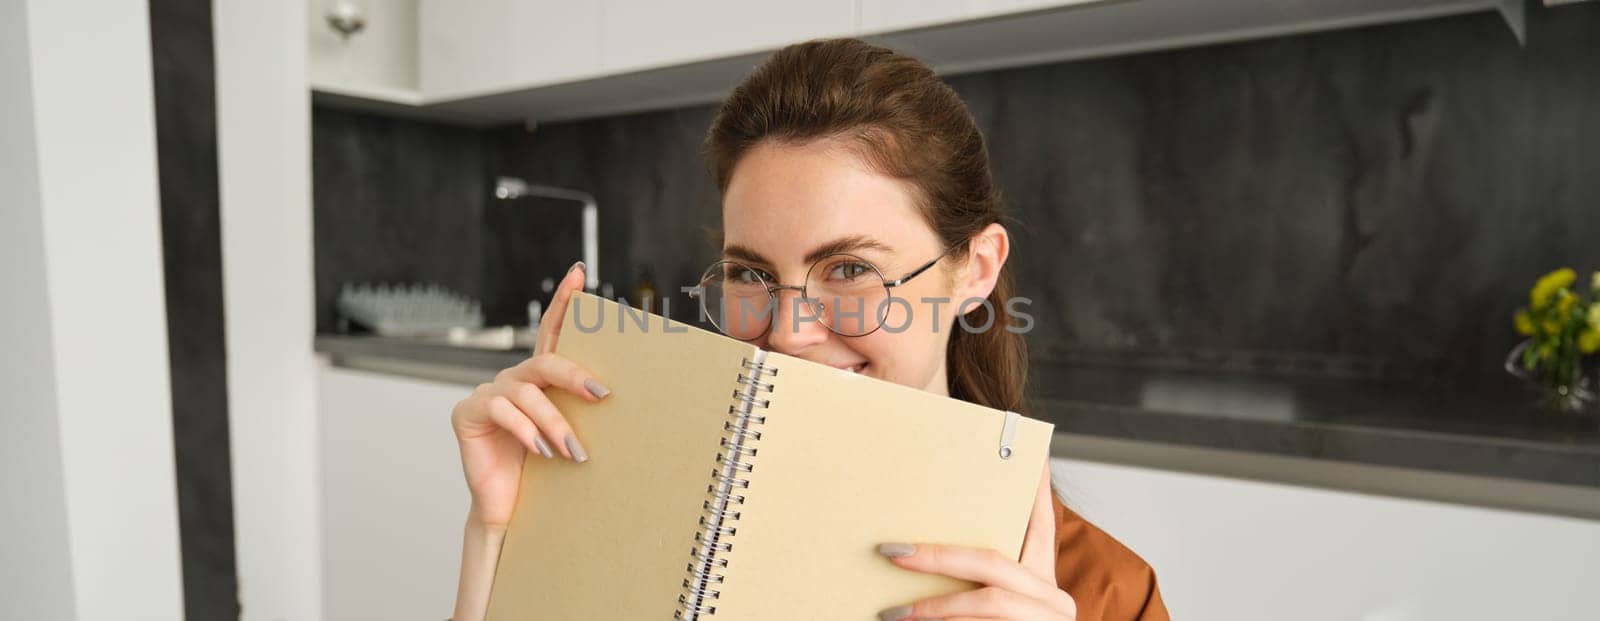 Close up portrait of smiling beautiful woman with notebook, making notes, writing in diary, studying at home, preparing homework at in kitchen.